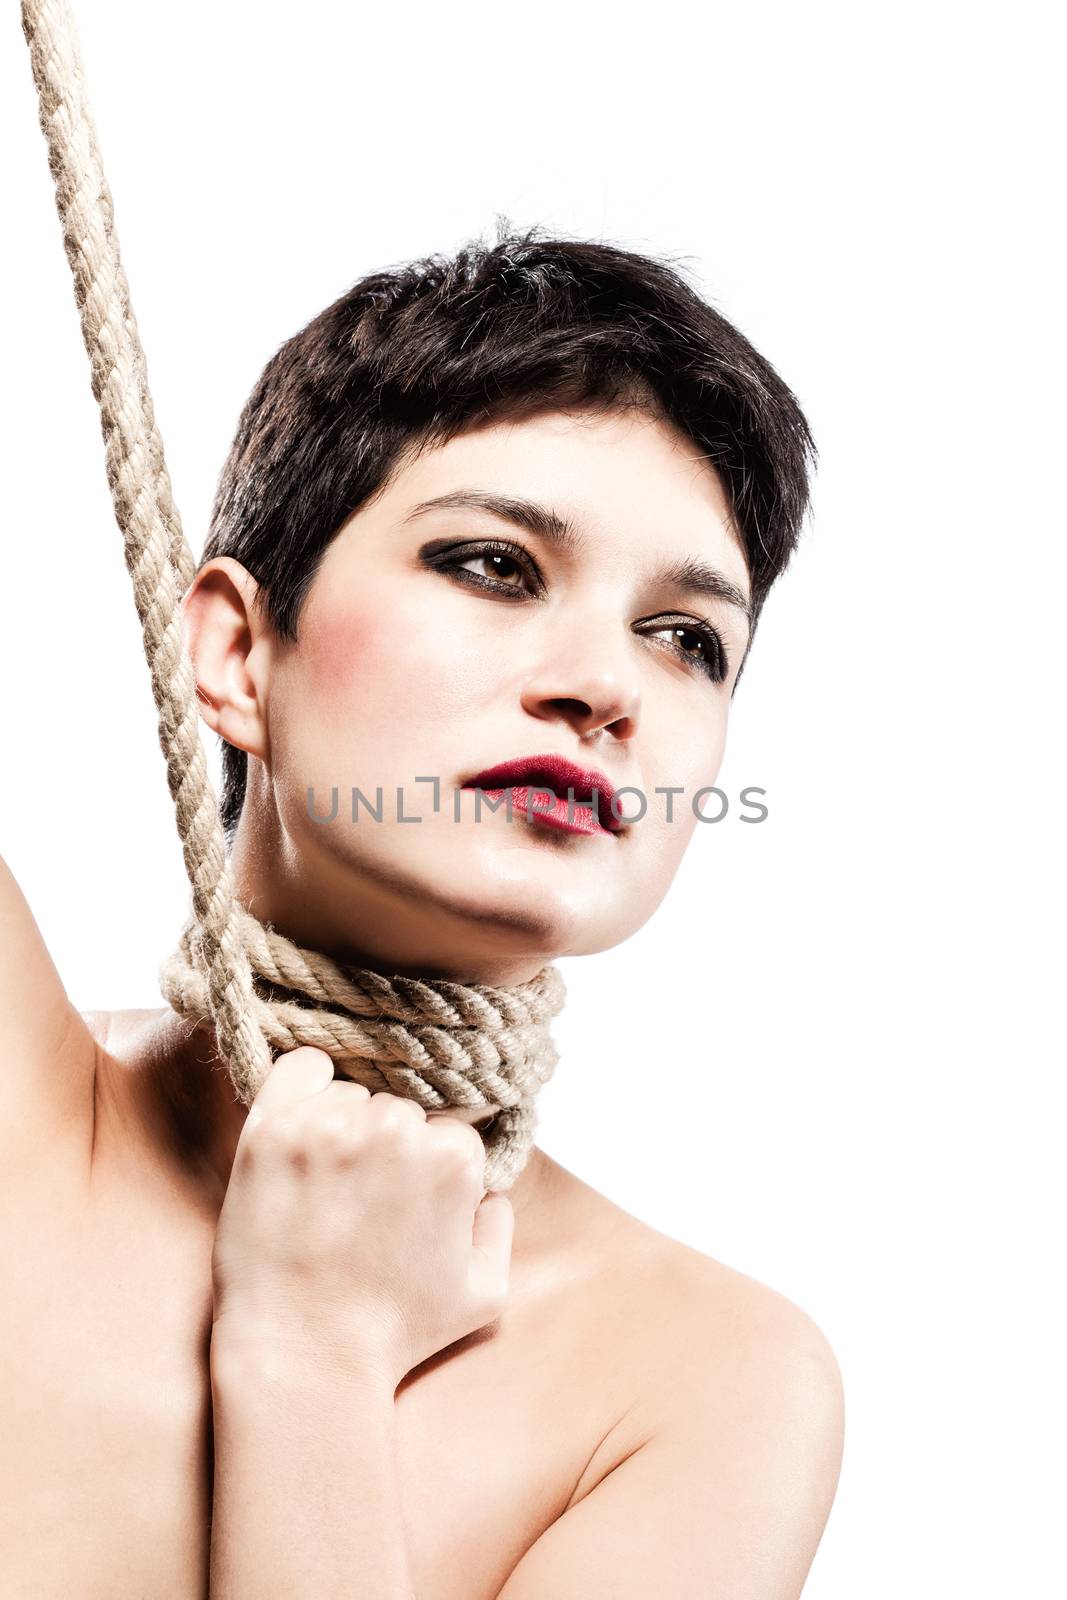 girl with short hair, having rope around her neck